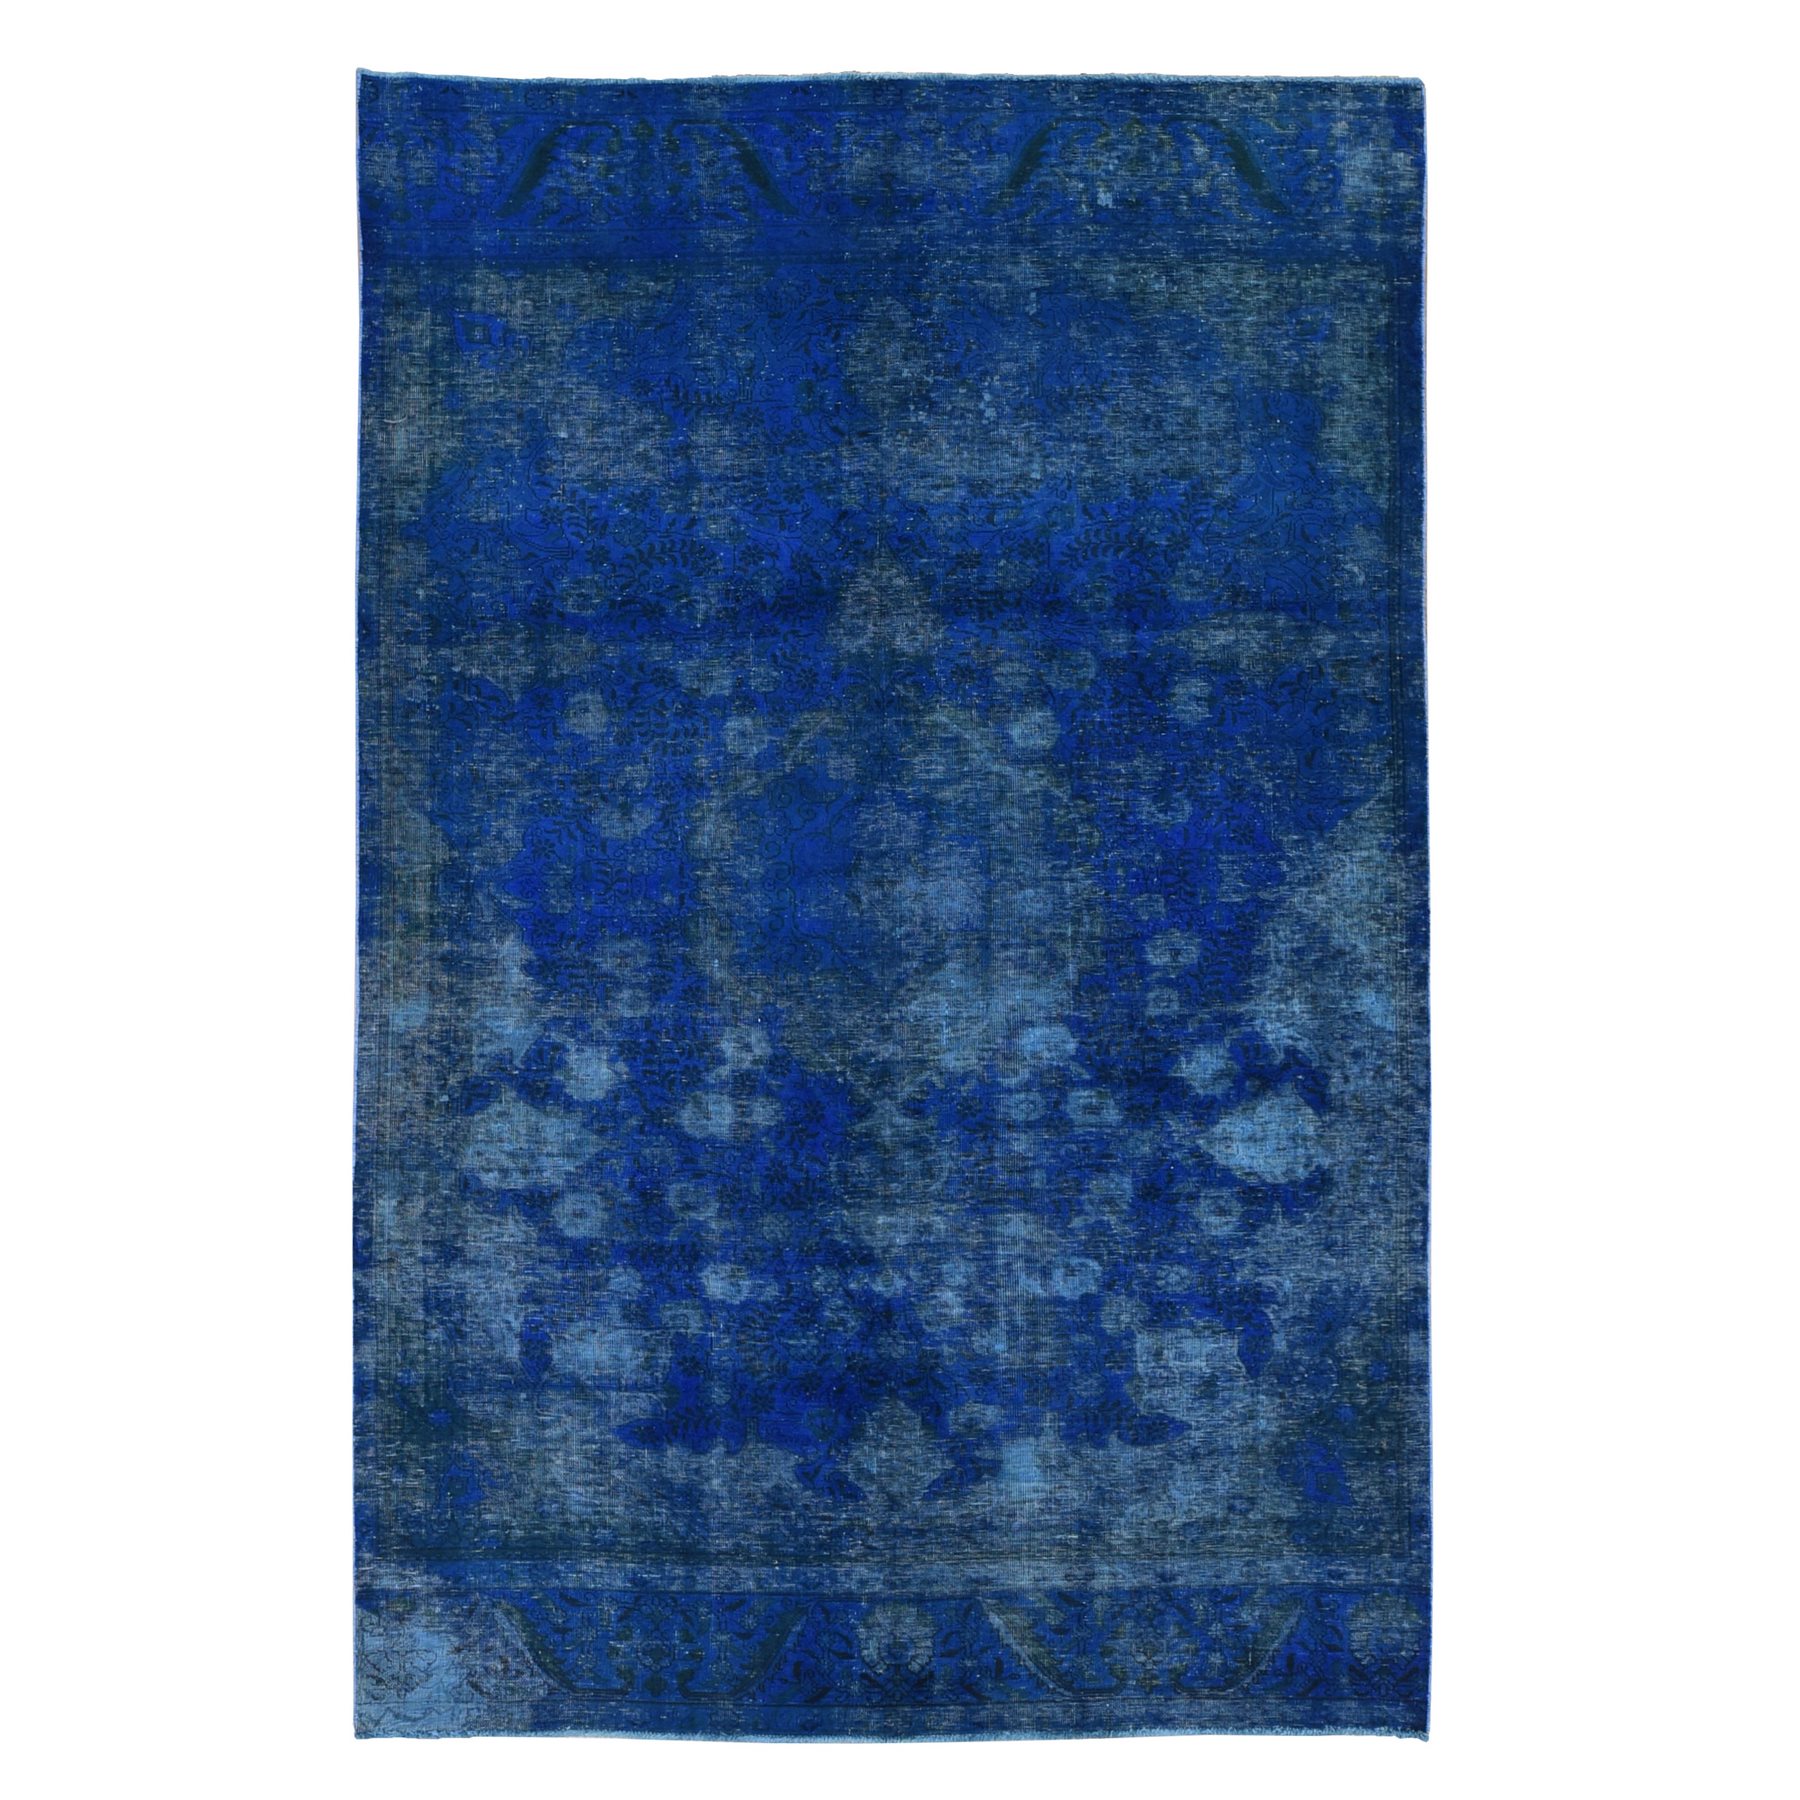  Wool Hand-Knotted Area Rug 6'10